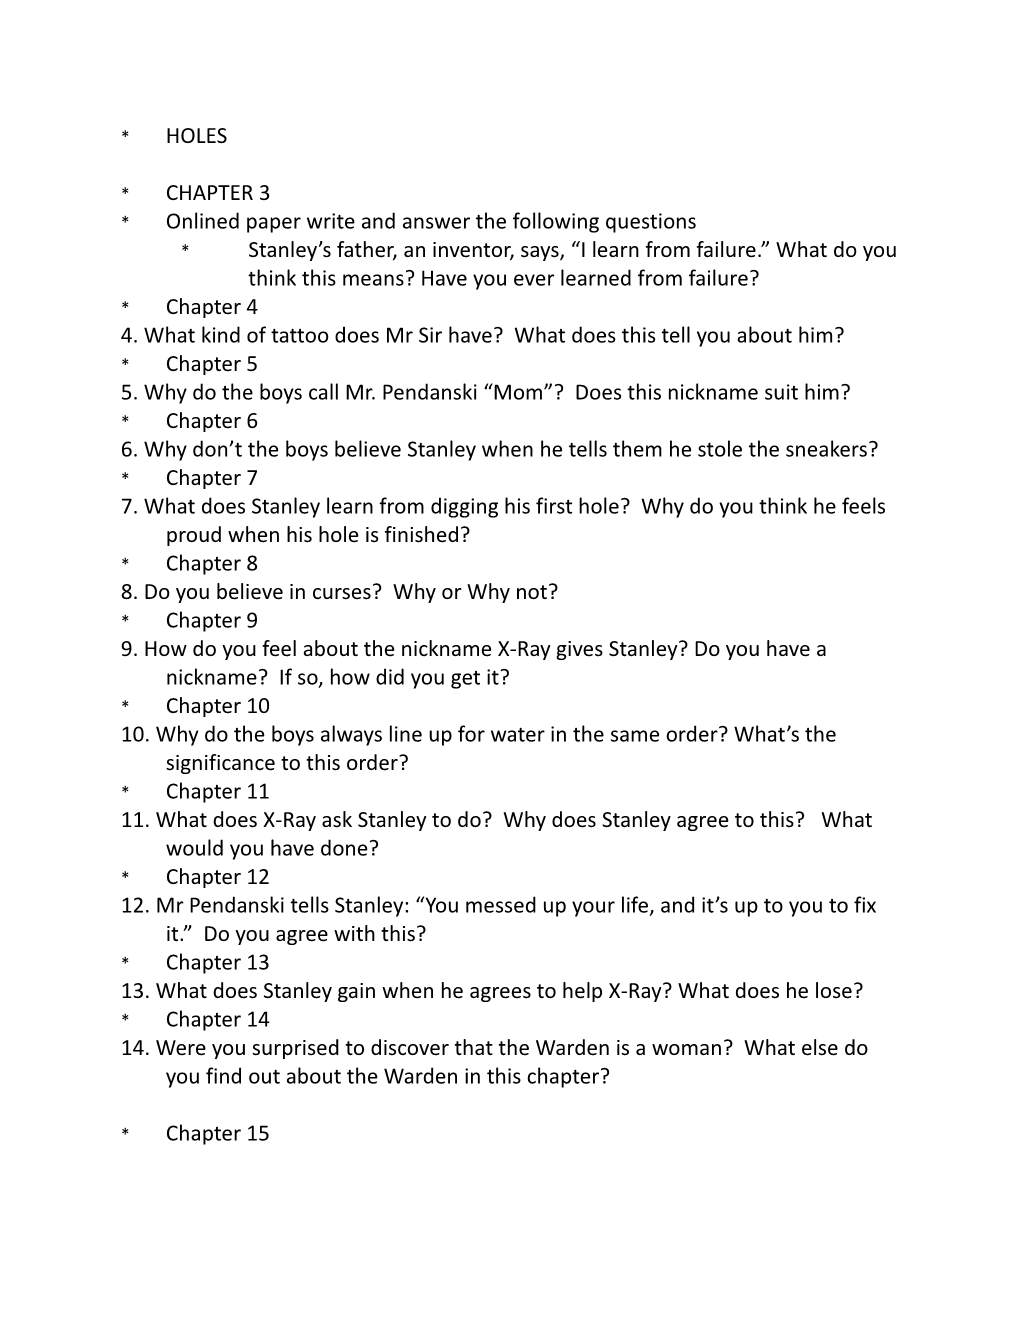 Onlined Paper Write and Answer the Following Questions